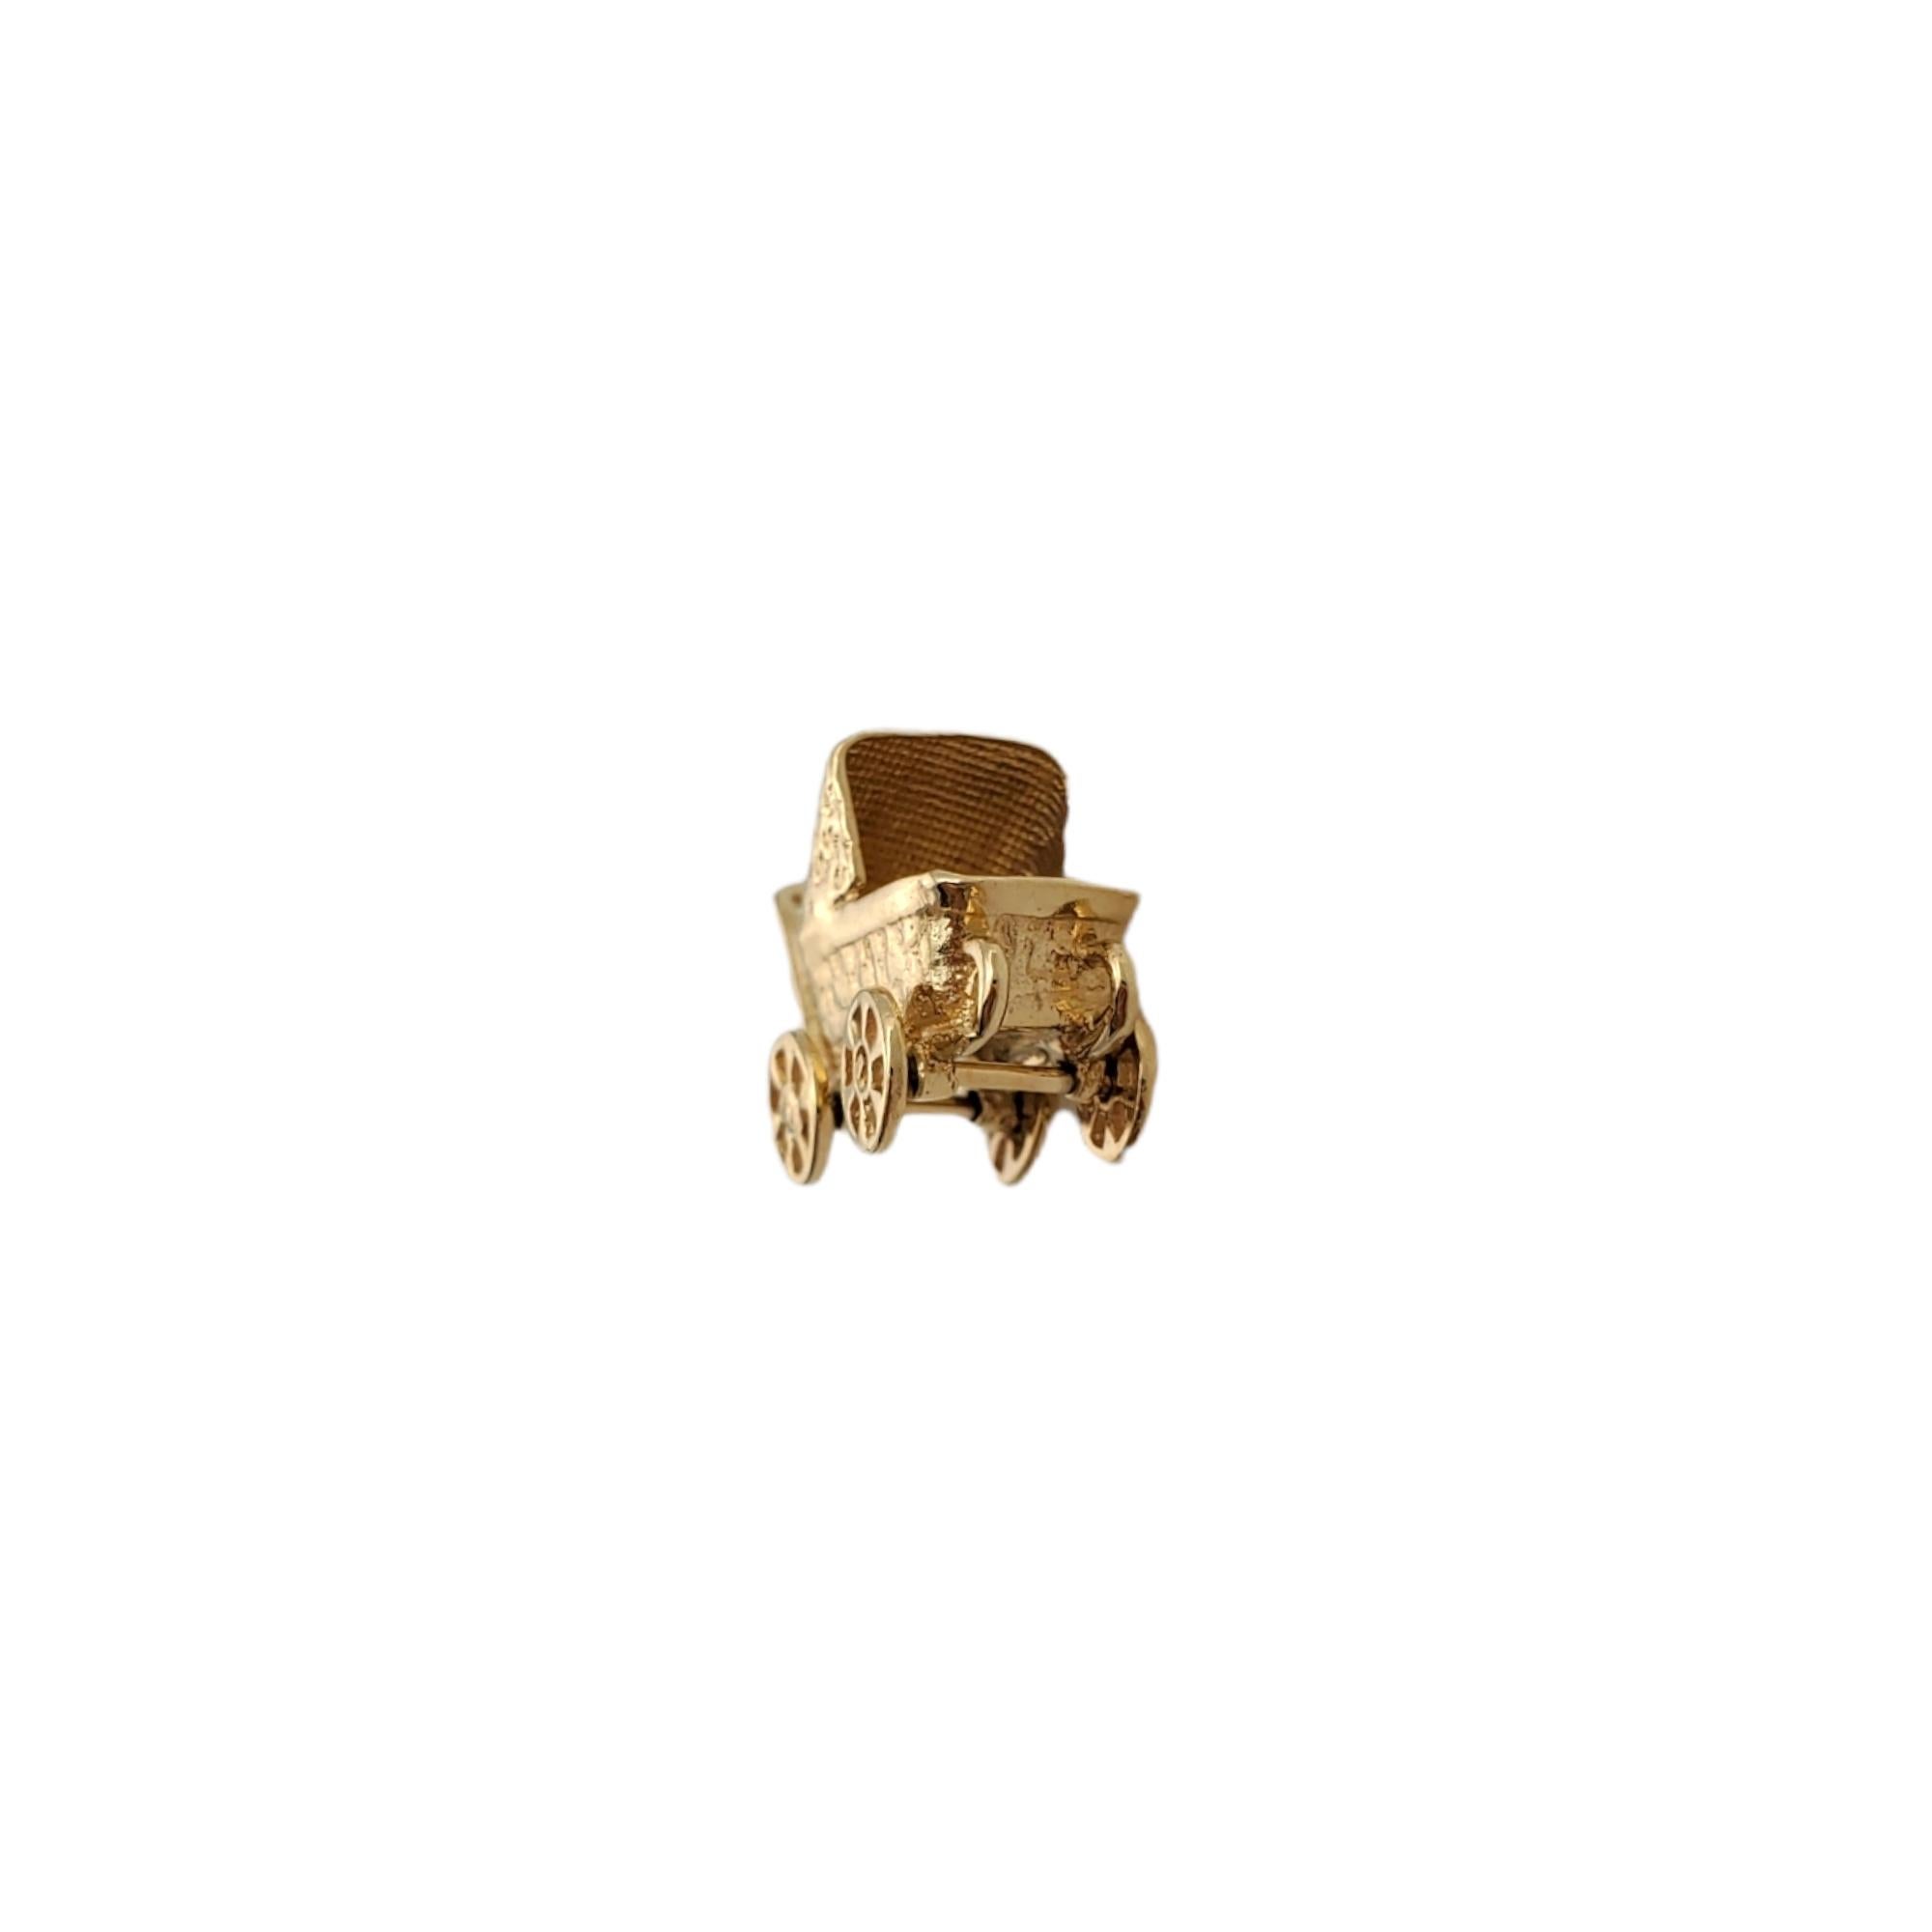 Vintage 14K Yellow Gold Stroller Charm 

Beautiful yellow gold stroller charm! 

Size: 7.86mm X 16.58mm

Weight:  2.1gr /  1.3dwt

Very good condition, professionally polished.

Will come packaged in a gift box and will be shipped U.S. Priority Mail